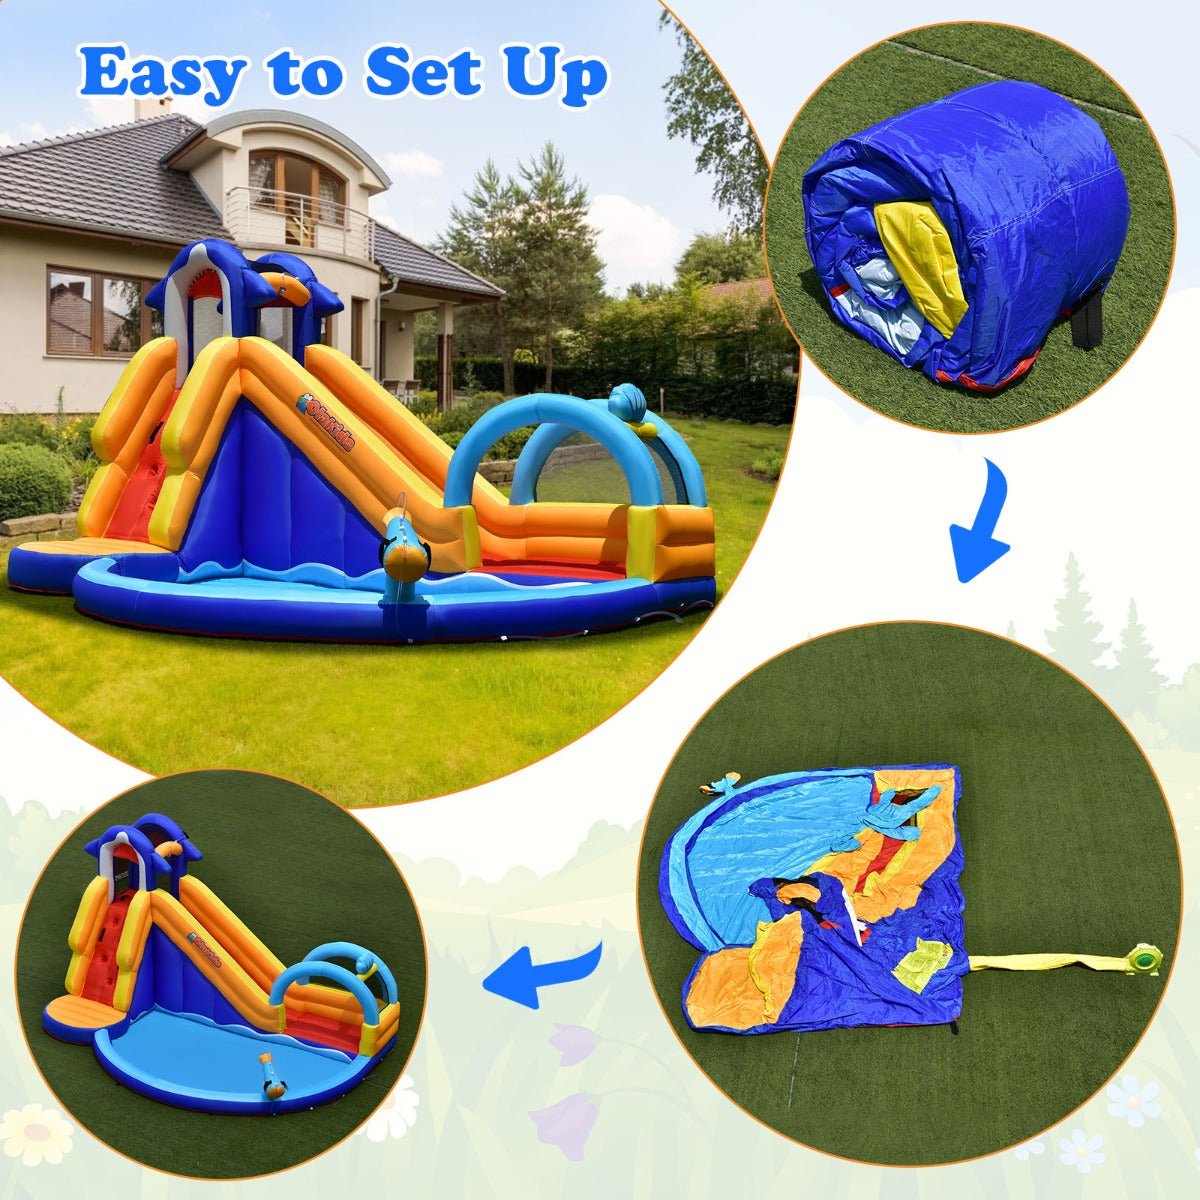 Water Bounce House with Basketball Rim - Active Playtime for Kids